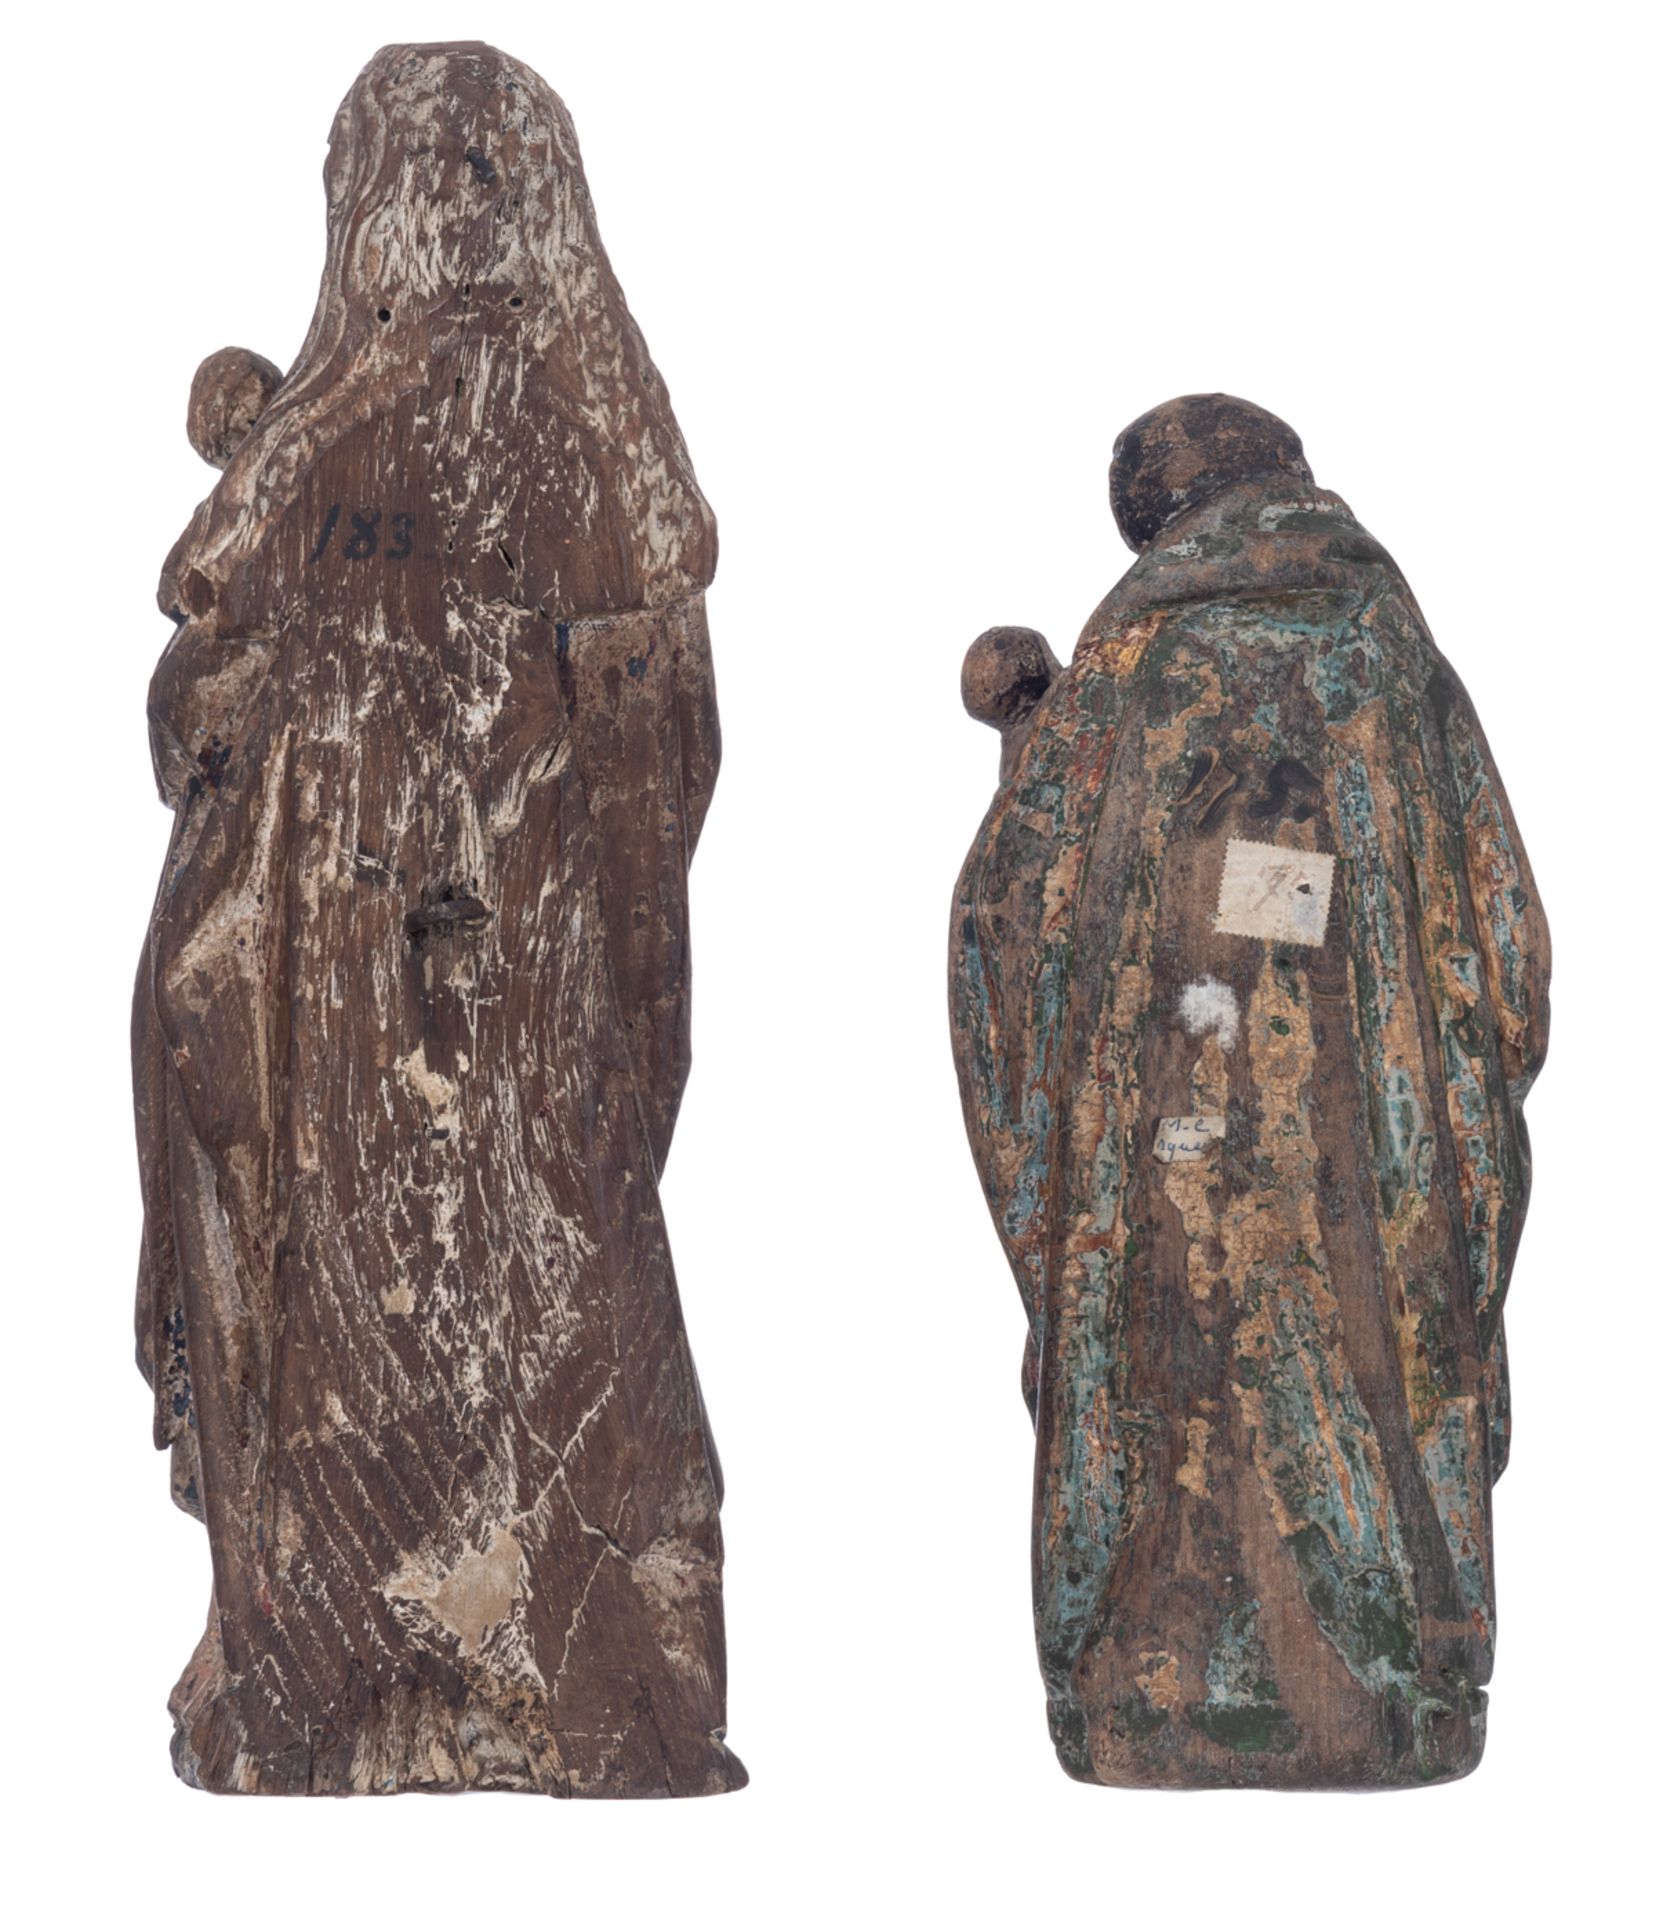 A 16th/17thC oak sculpture with traces of polychrome paint representing the Nursing Madonna, Souther - Image 3 of 7